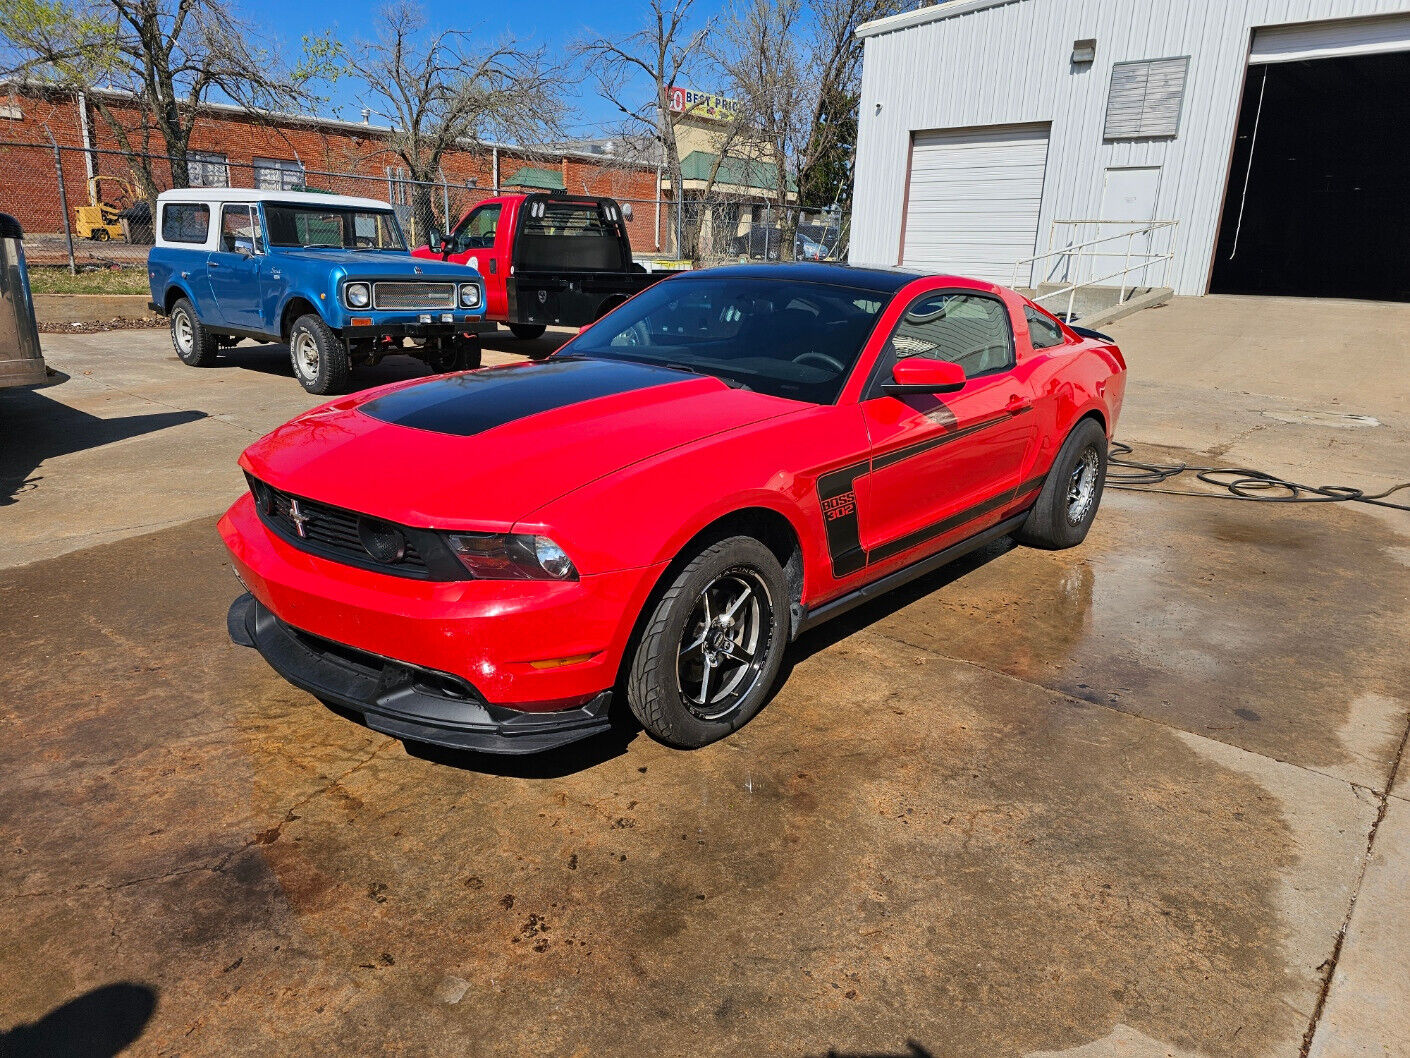 2008 Mustang Boss 302 Coupe Twin Turbo auto runs in the low 10s @ .25 mile.